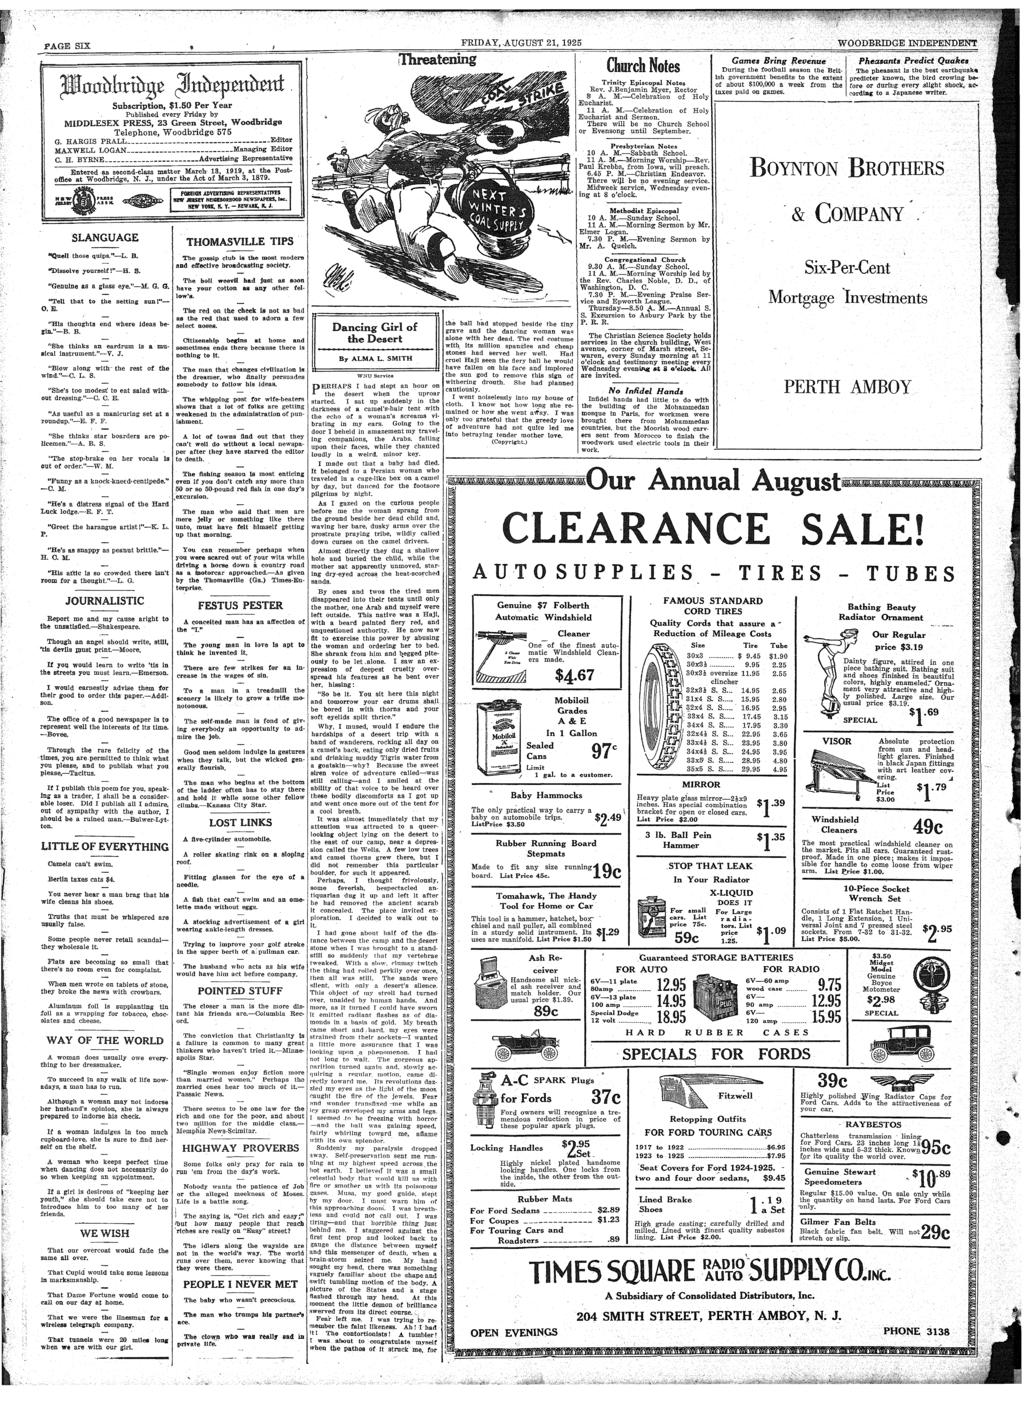 FAGE SIX FRIDAY, AUGUST 21, 1925 WOODBRIDGE INDEPENDENT Subscrpton, $1.50 Per Year Publshed every Frday by MIDDLESEX PRESS, 23 Green Street, WoodBrdge Telephone, Woodbrdge 575 G.